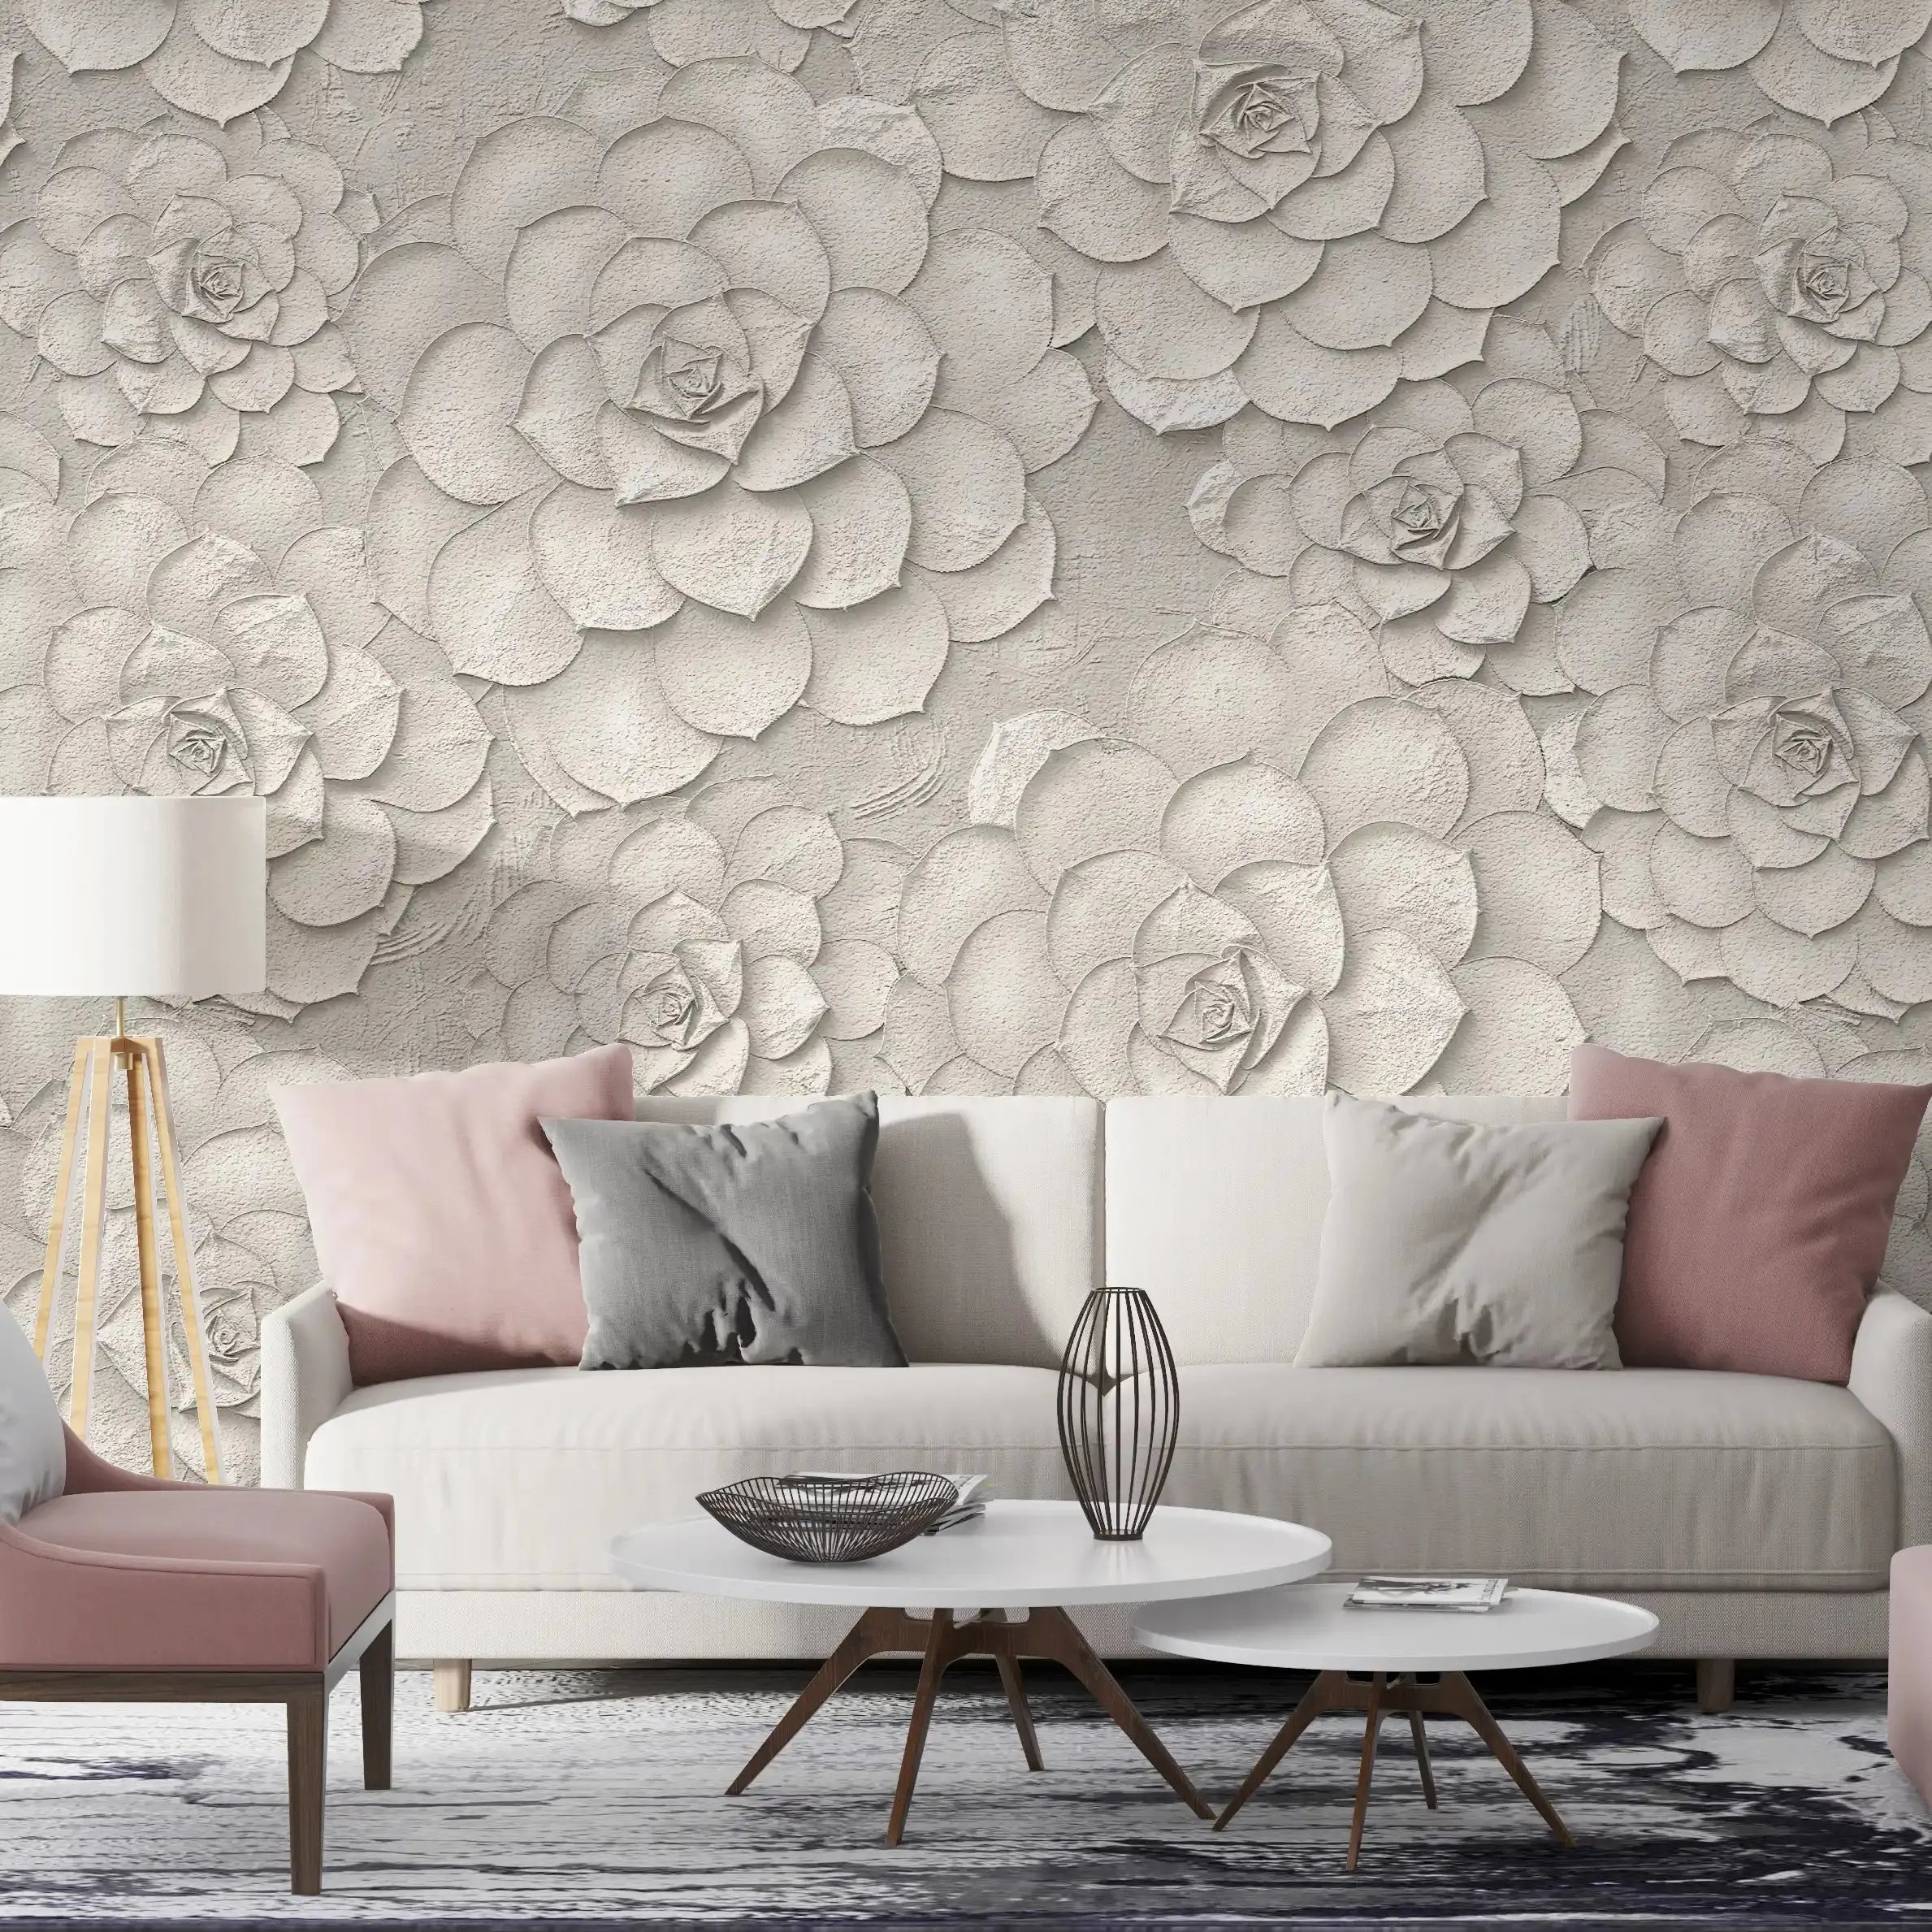 3012-E / Peel and Stick Wallpaper: Grey Rose and White Floral, Easy Install, Self Adhesive Wall Paper for Any Room - Artevella